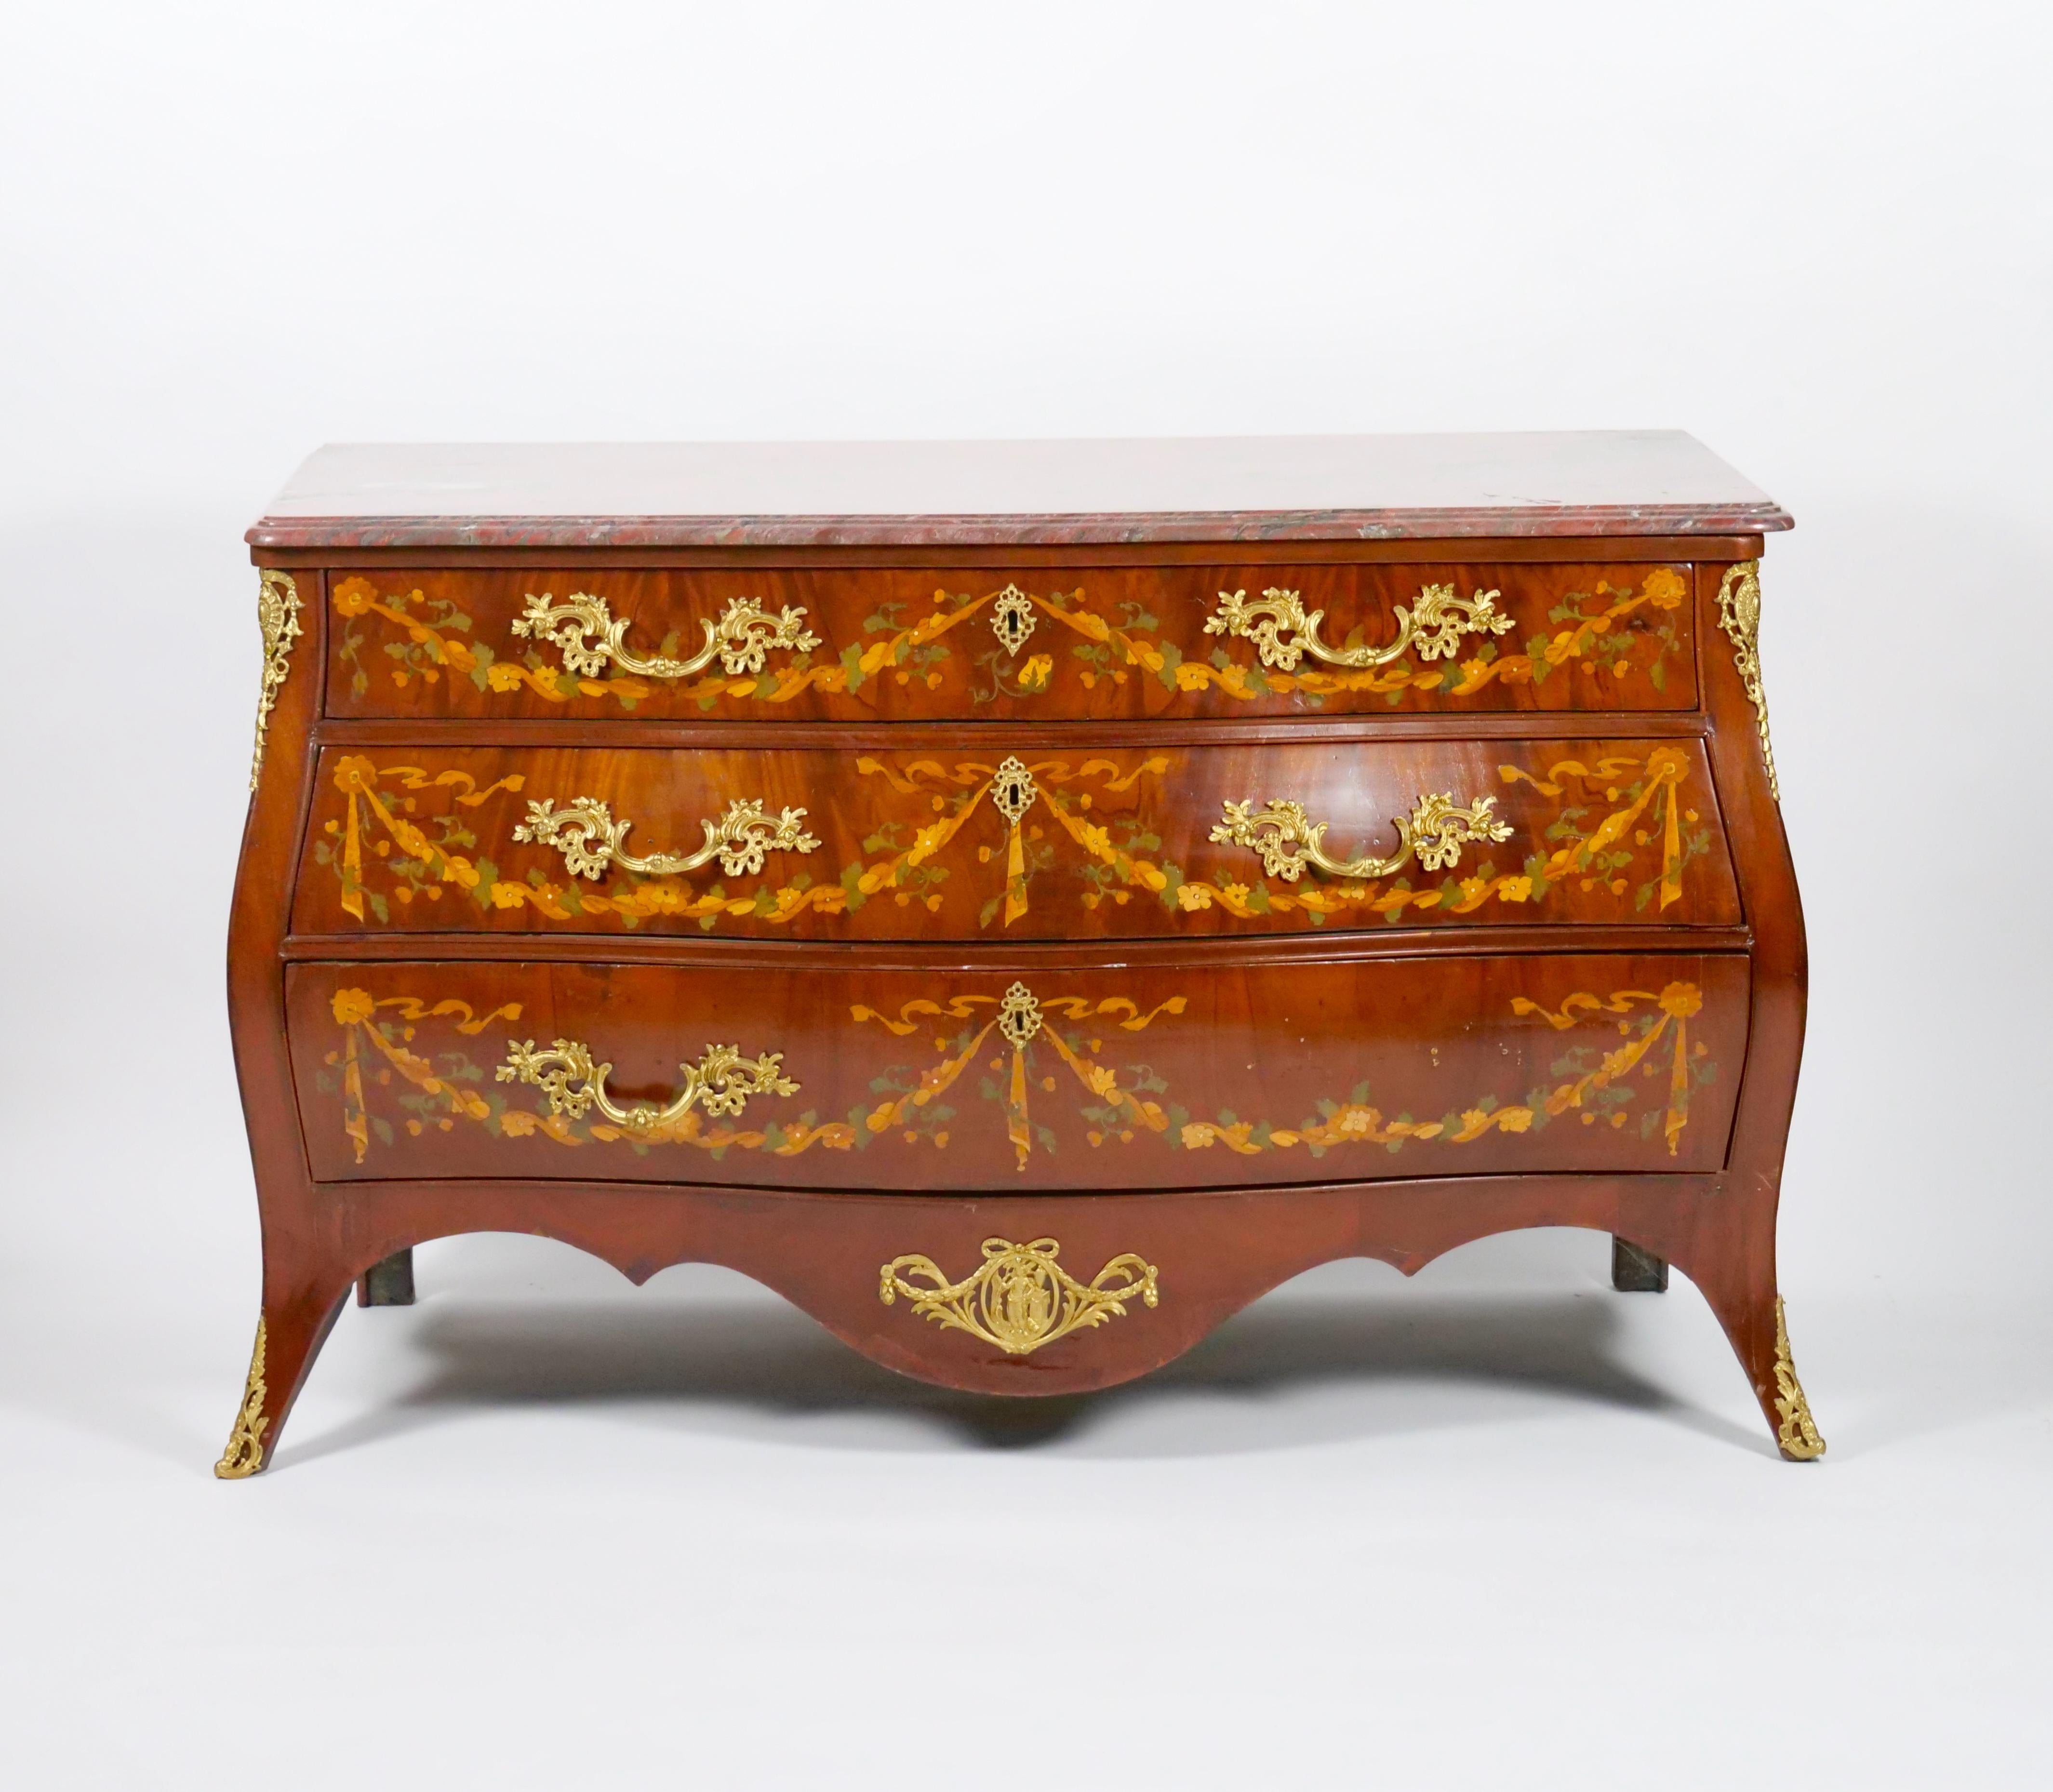 Antique Marble Top Floral Marquetry Inlaid Mahogany Commode / Credenza For Sale 9